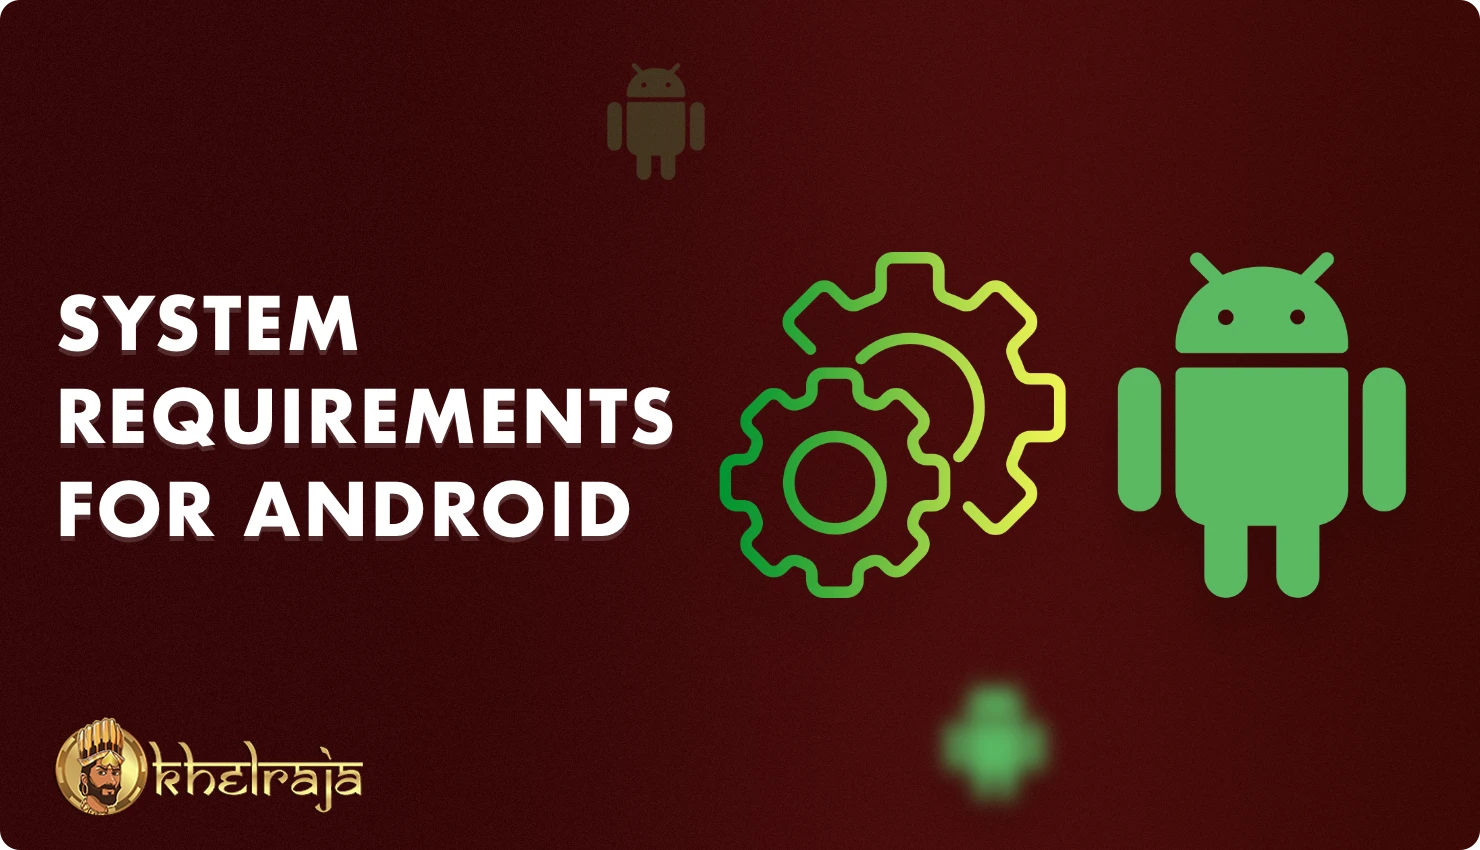 The system requirements of the Khelraja app are so low that it can be installed on almost any Android smartphone